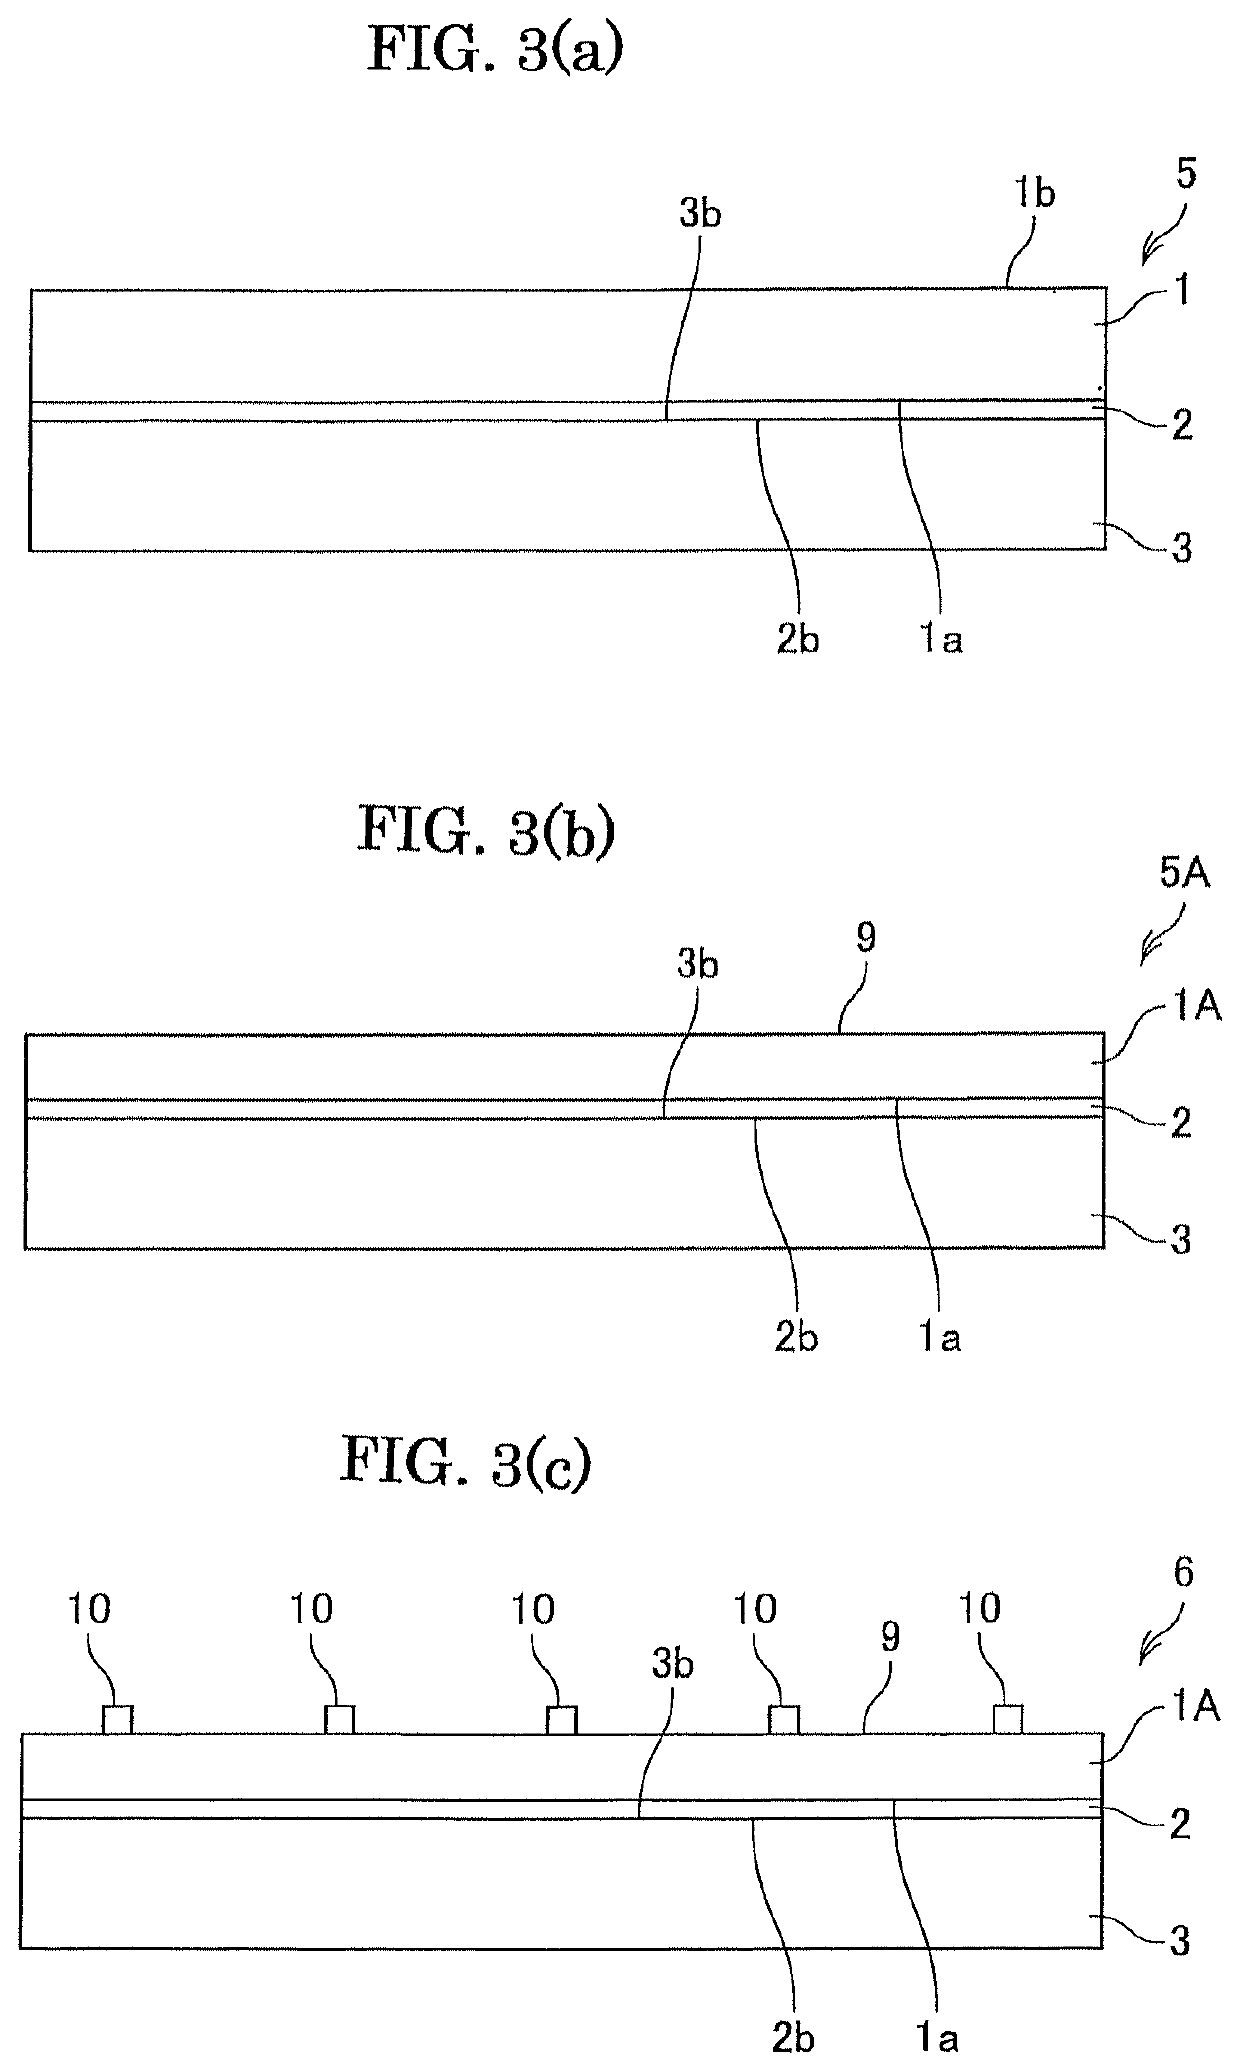 Joined body of piezoelectric material substrate and support substrate